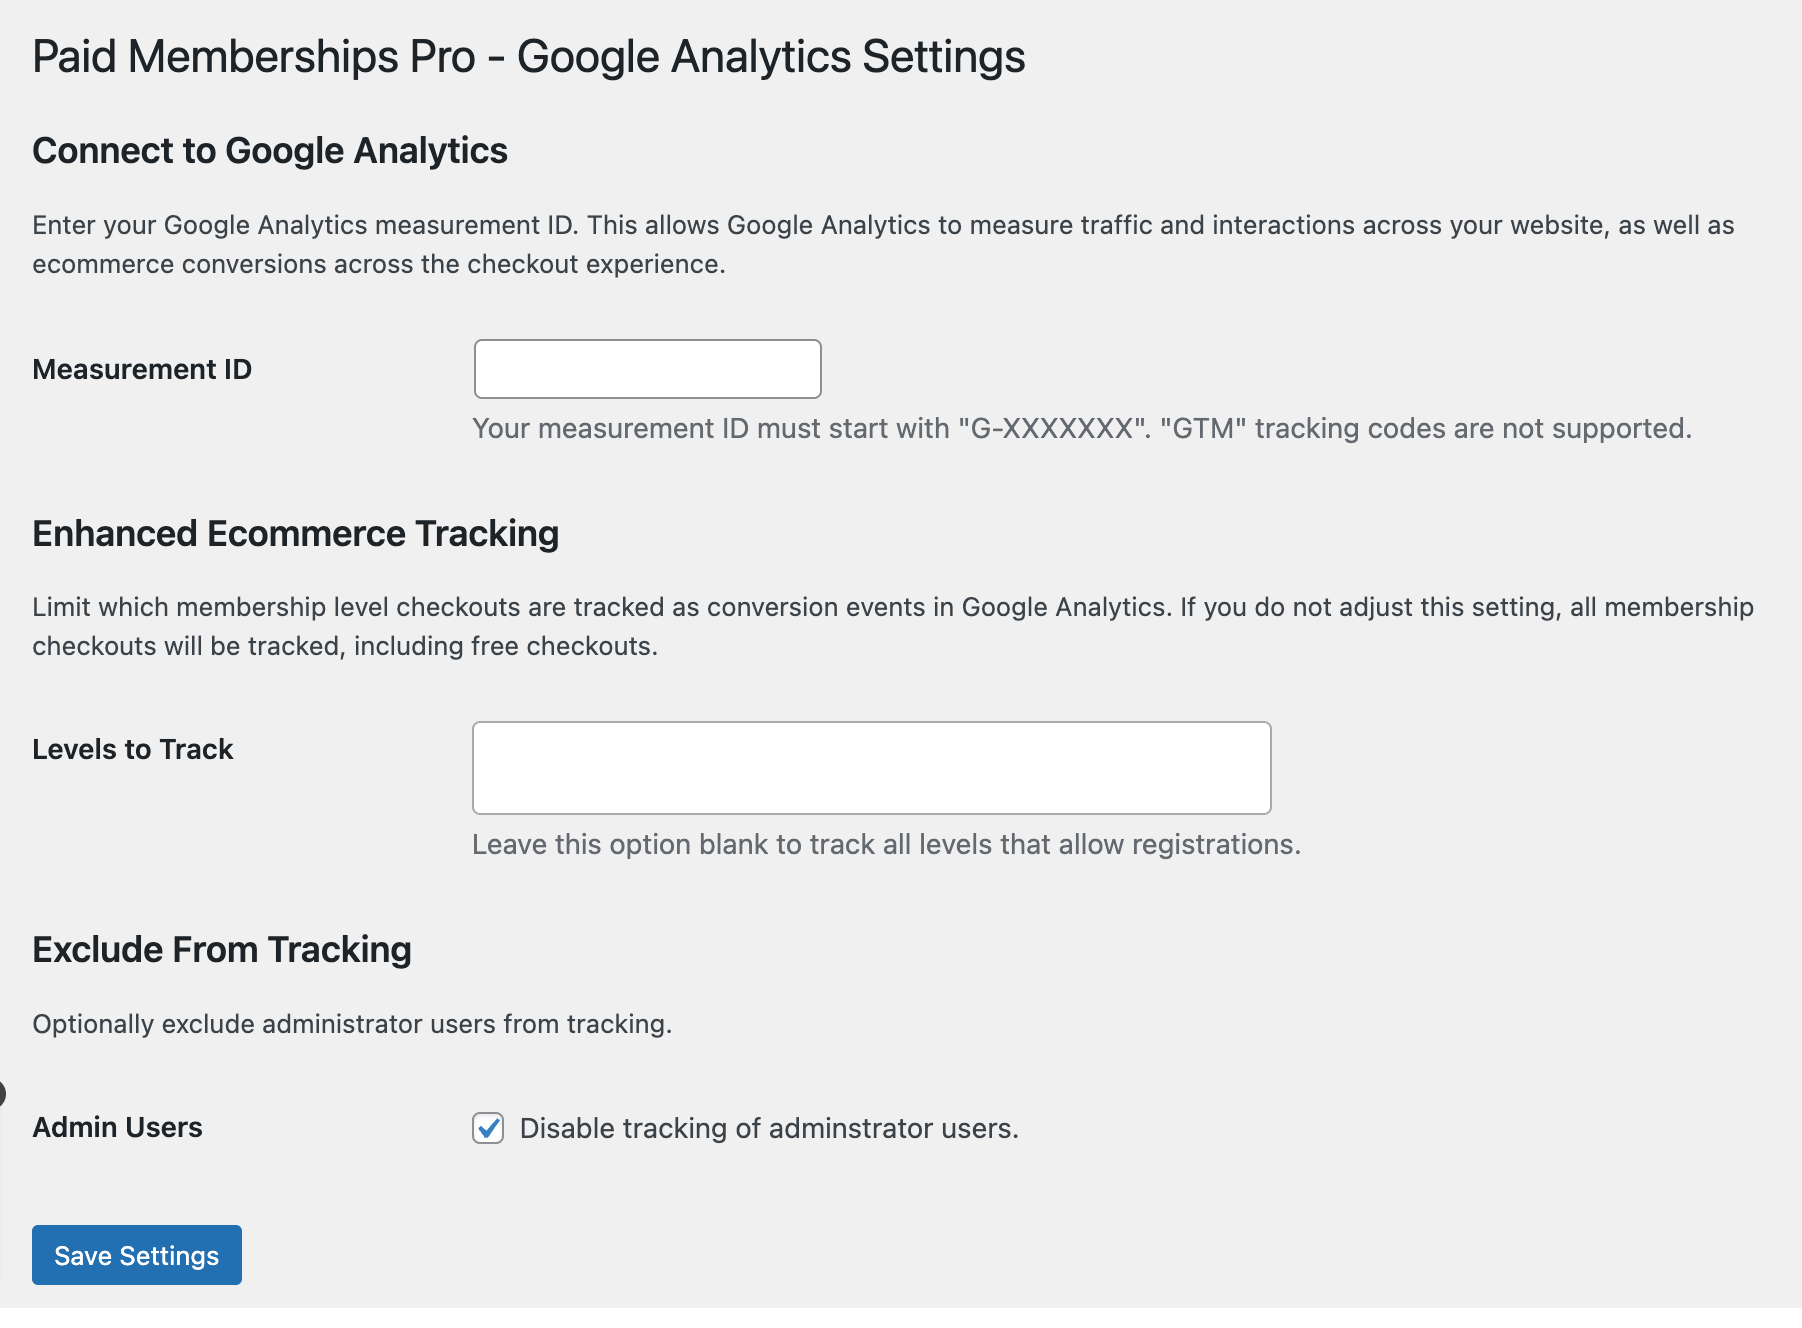 Screenshot of the settings page for the Google Analytics Integration for Paid Memberships Pro 